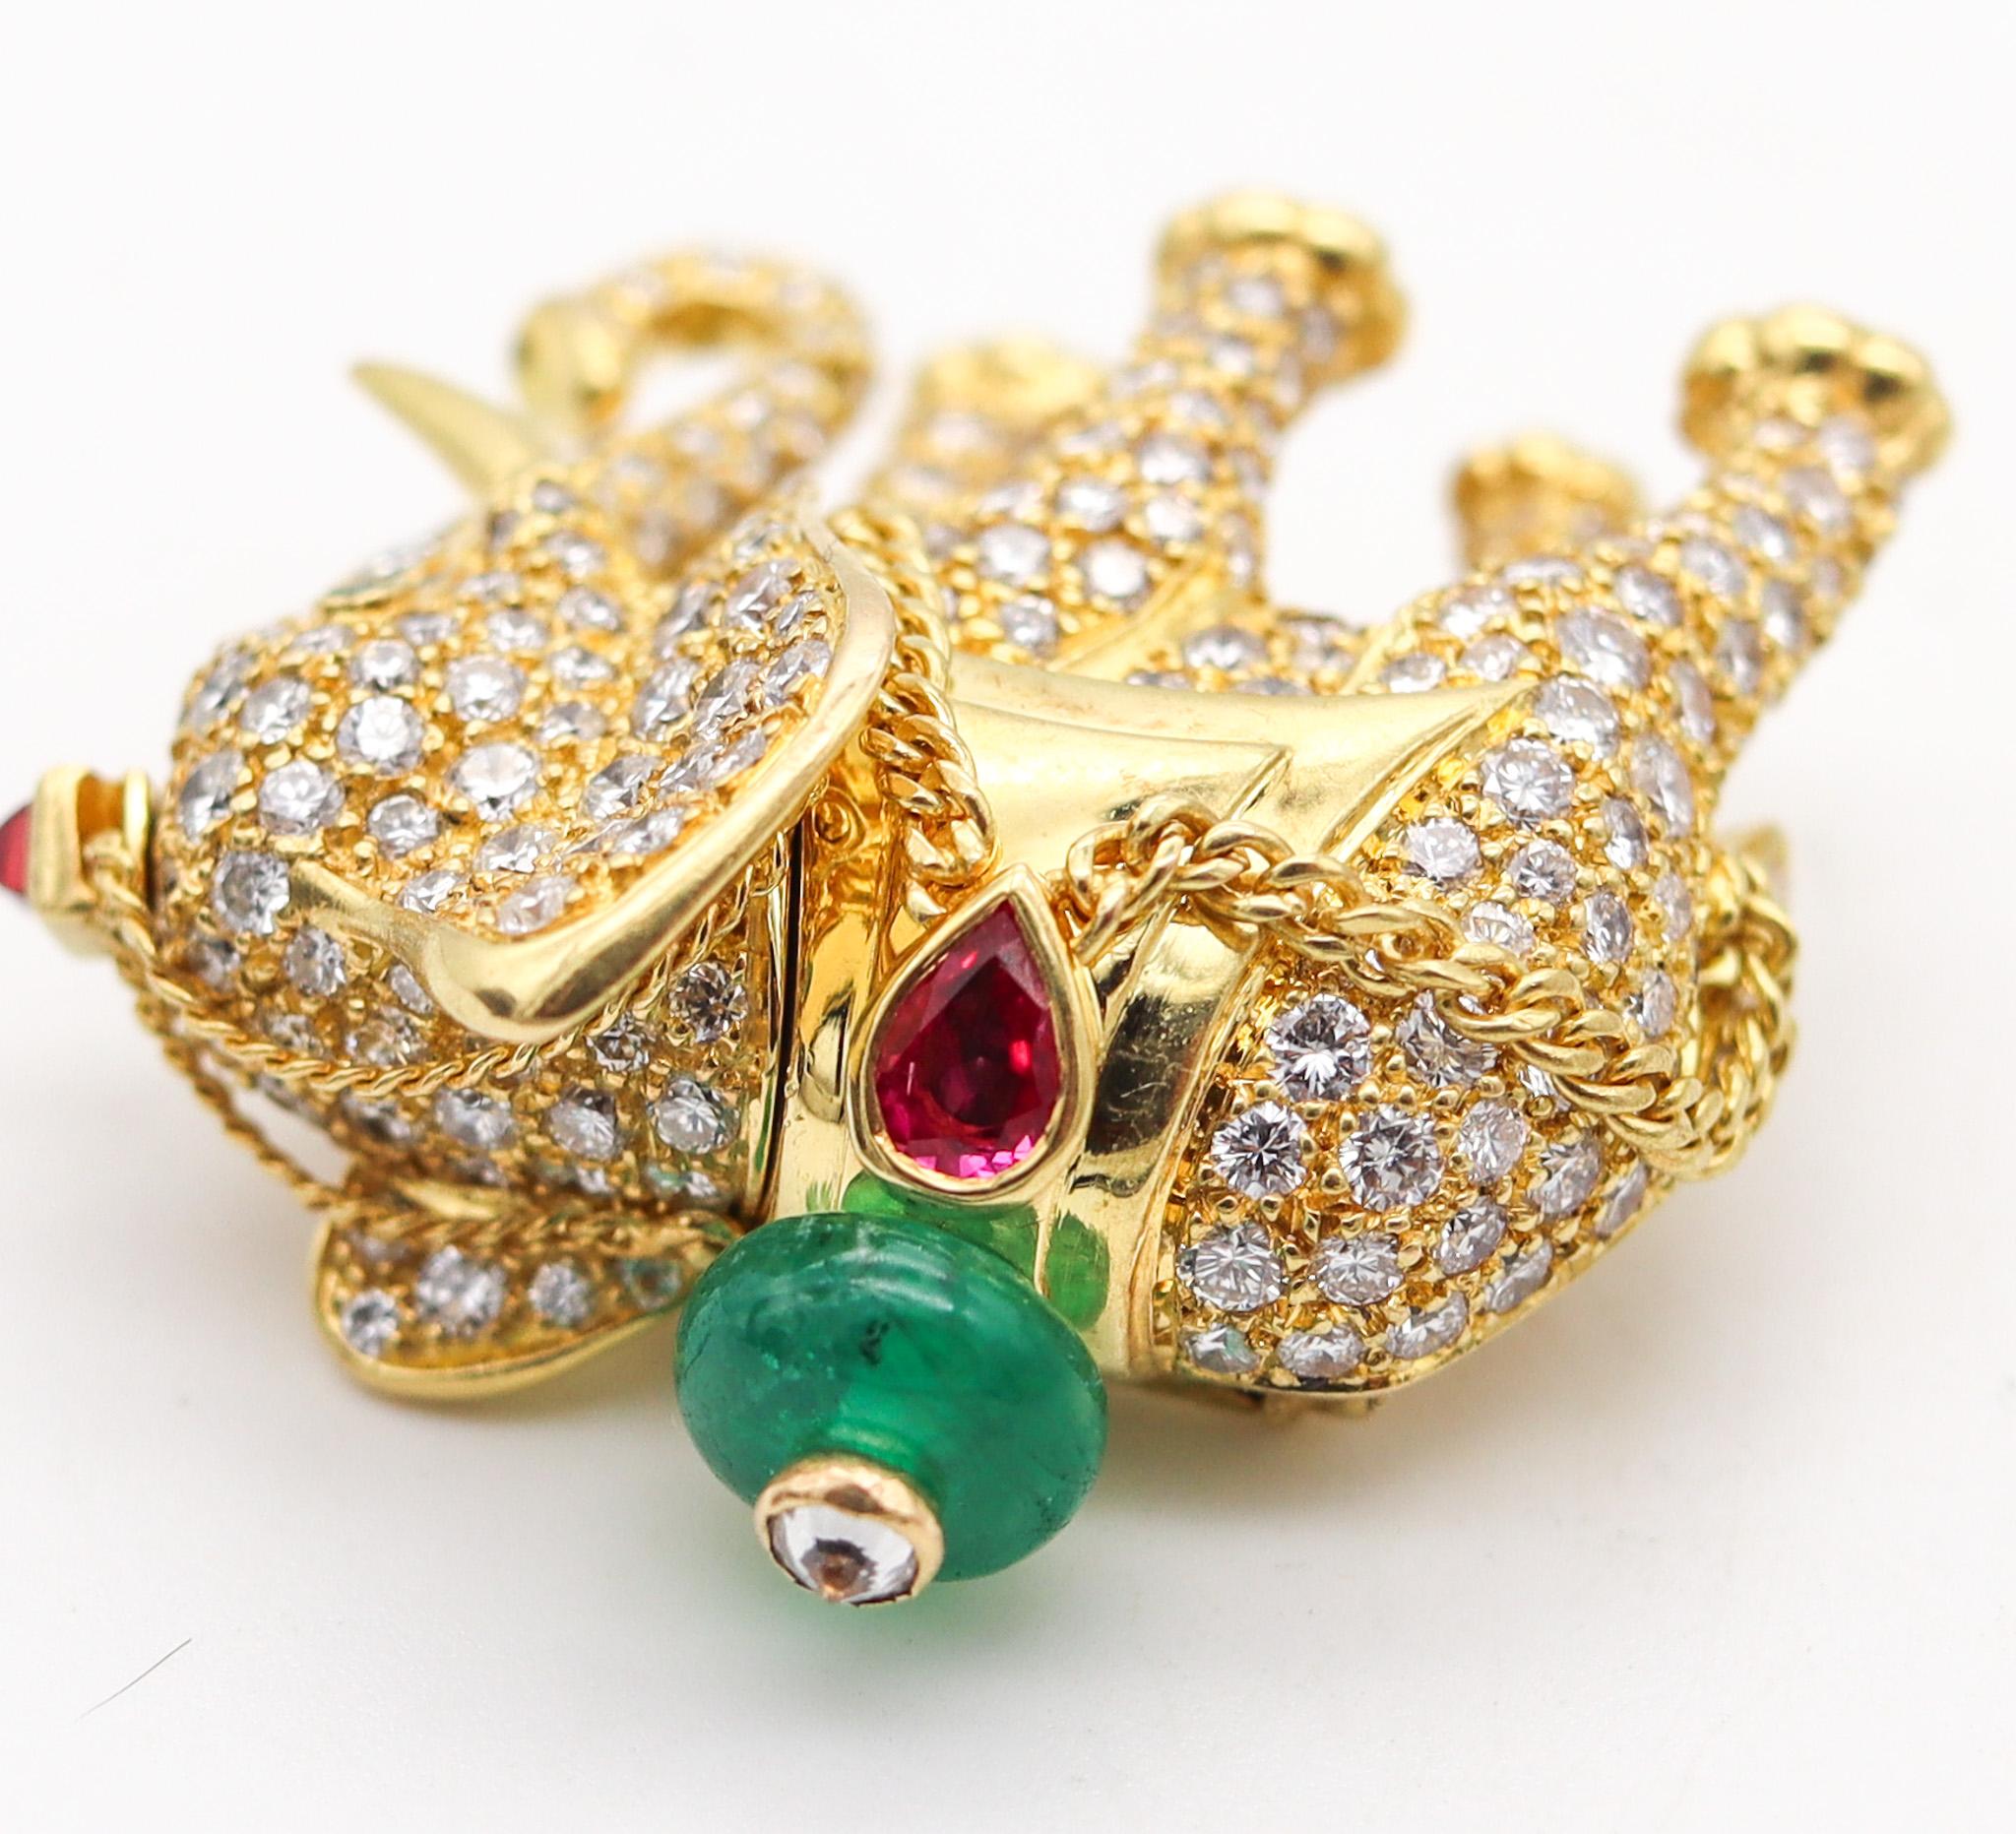 Cartier Paris Elephant Brooch 18Kt Gold With 5.24 Ctw Diamonds Emeralds & Rubies In Excellent Condition For Sale In Miami, FL